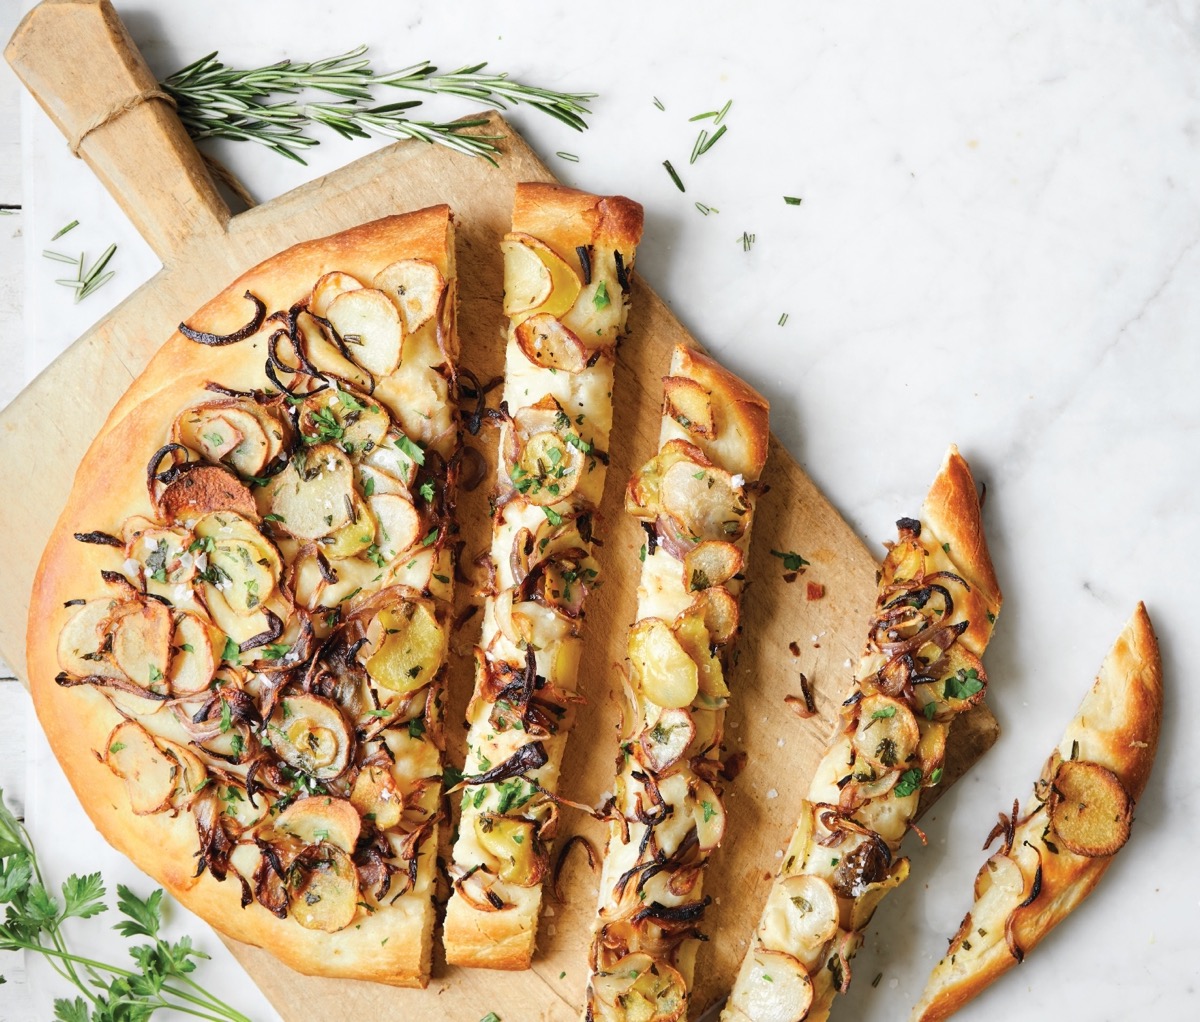 Potato focaccia garnished with fresh rosemary and charred onions on a cutting board.